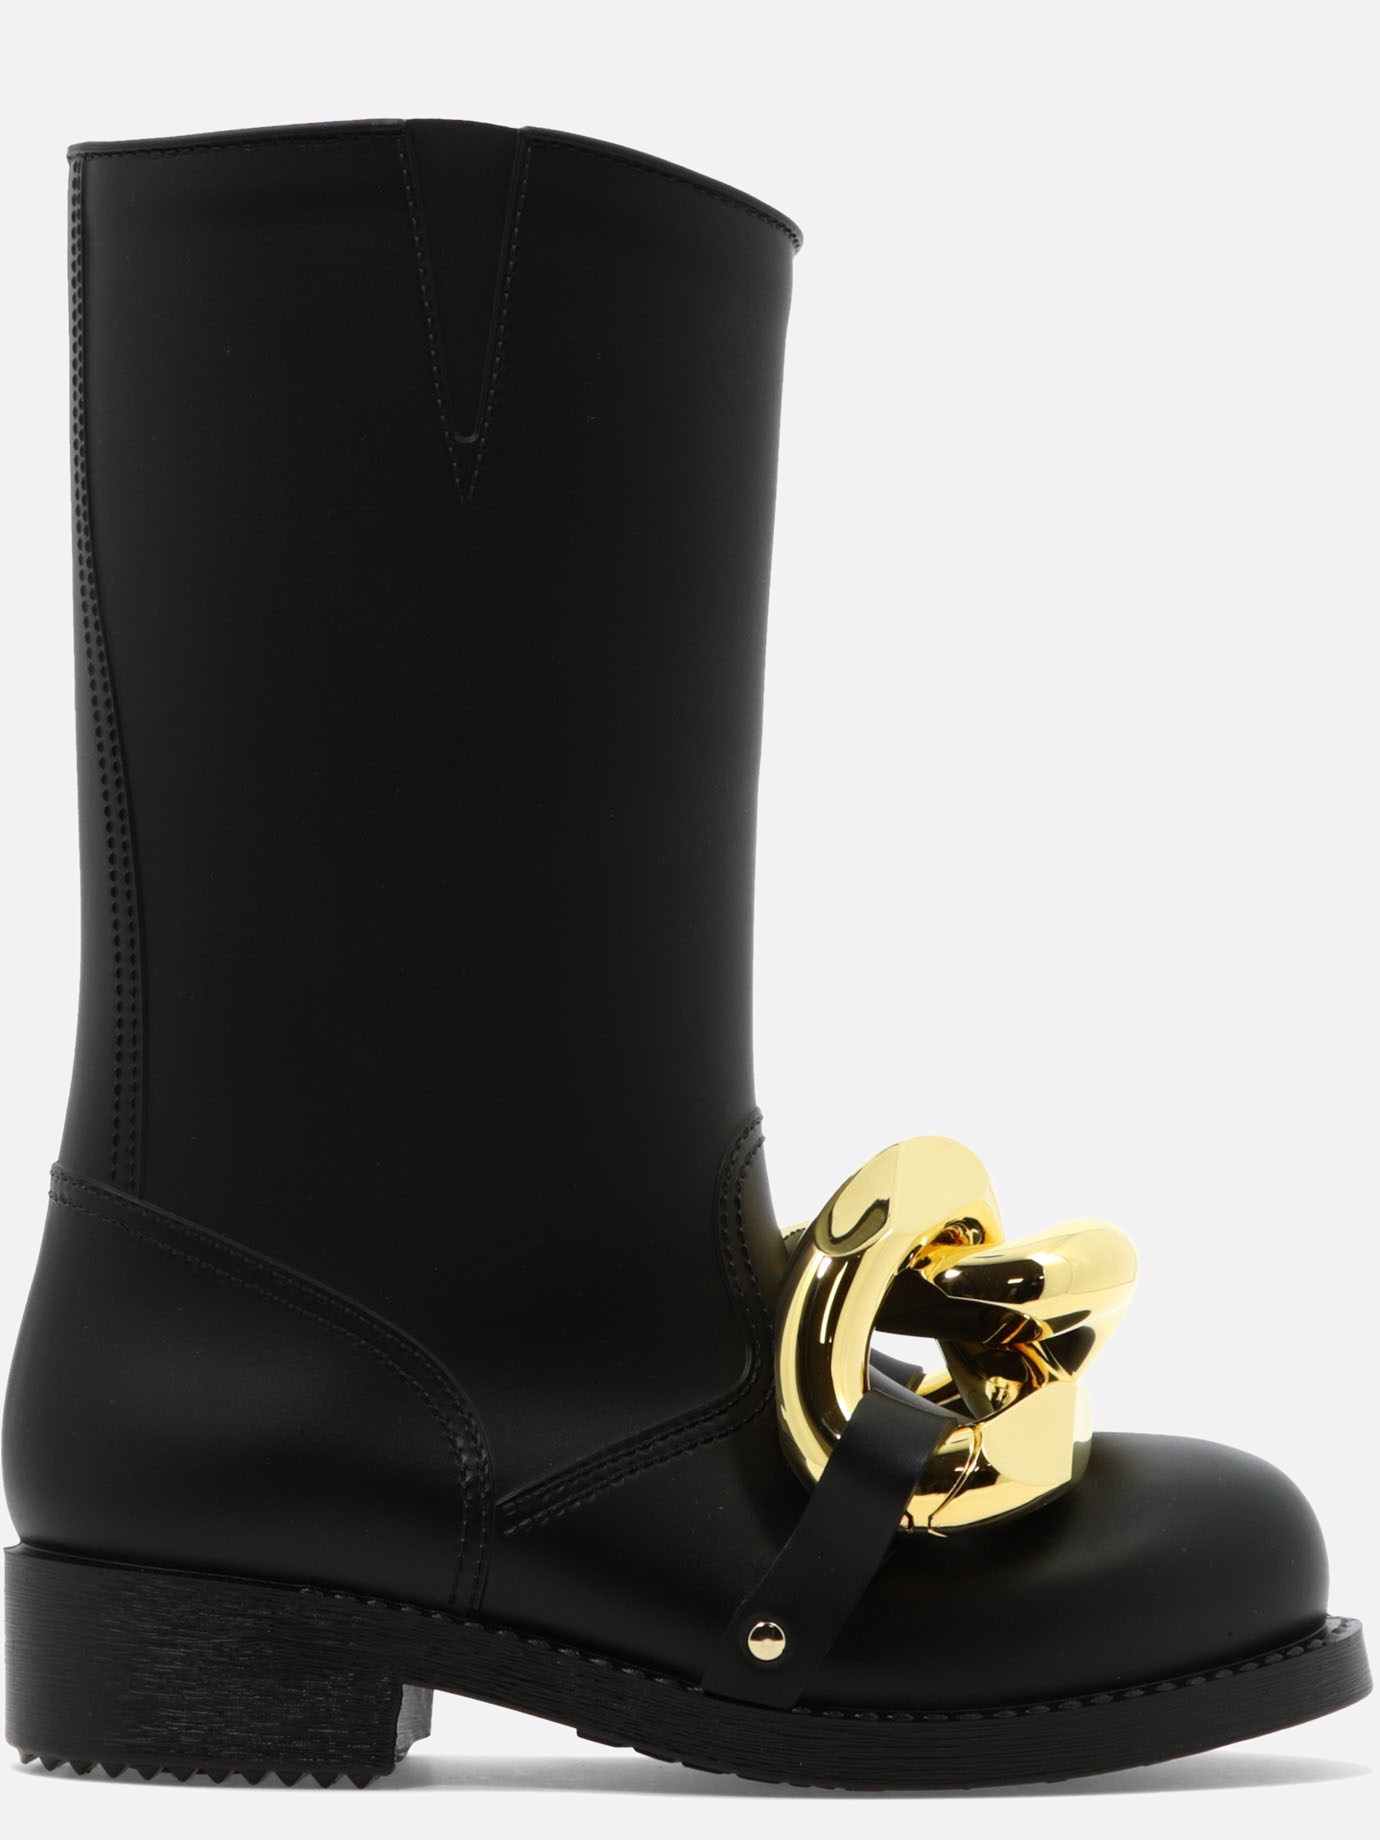  Chain  bootsby JW Anderson - 3